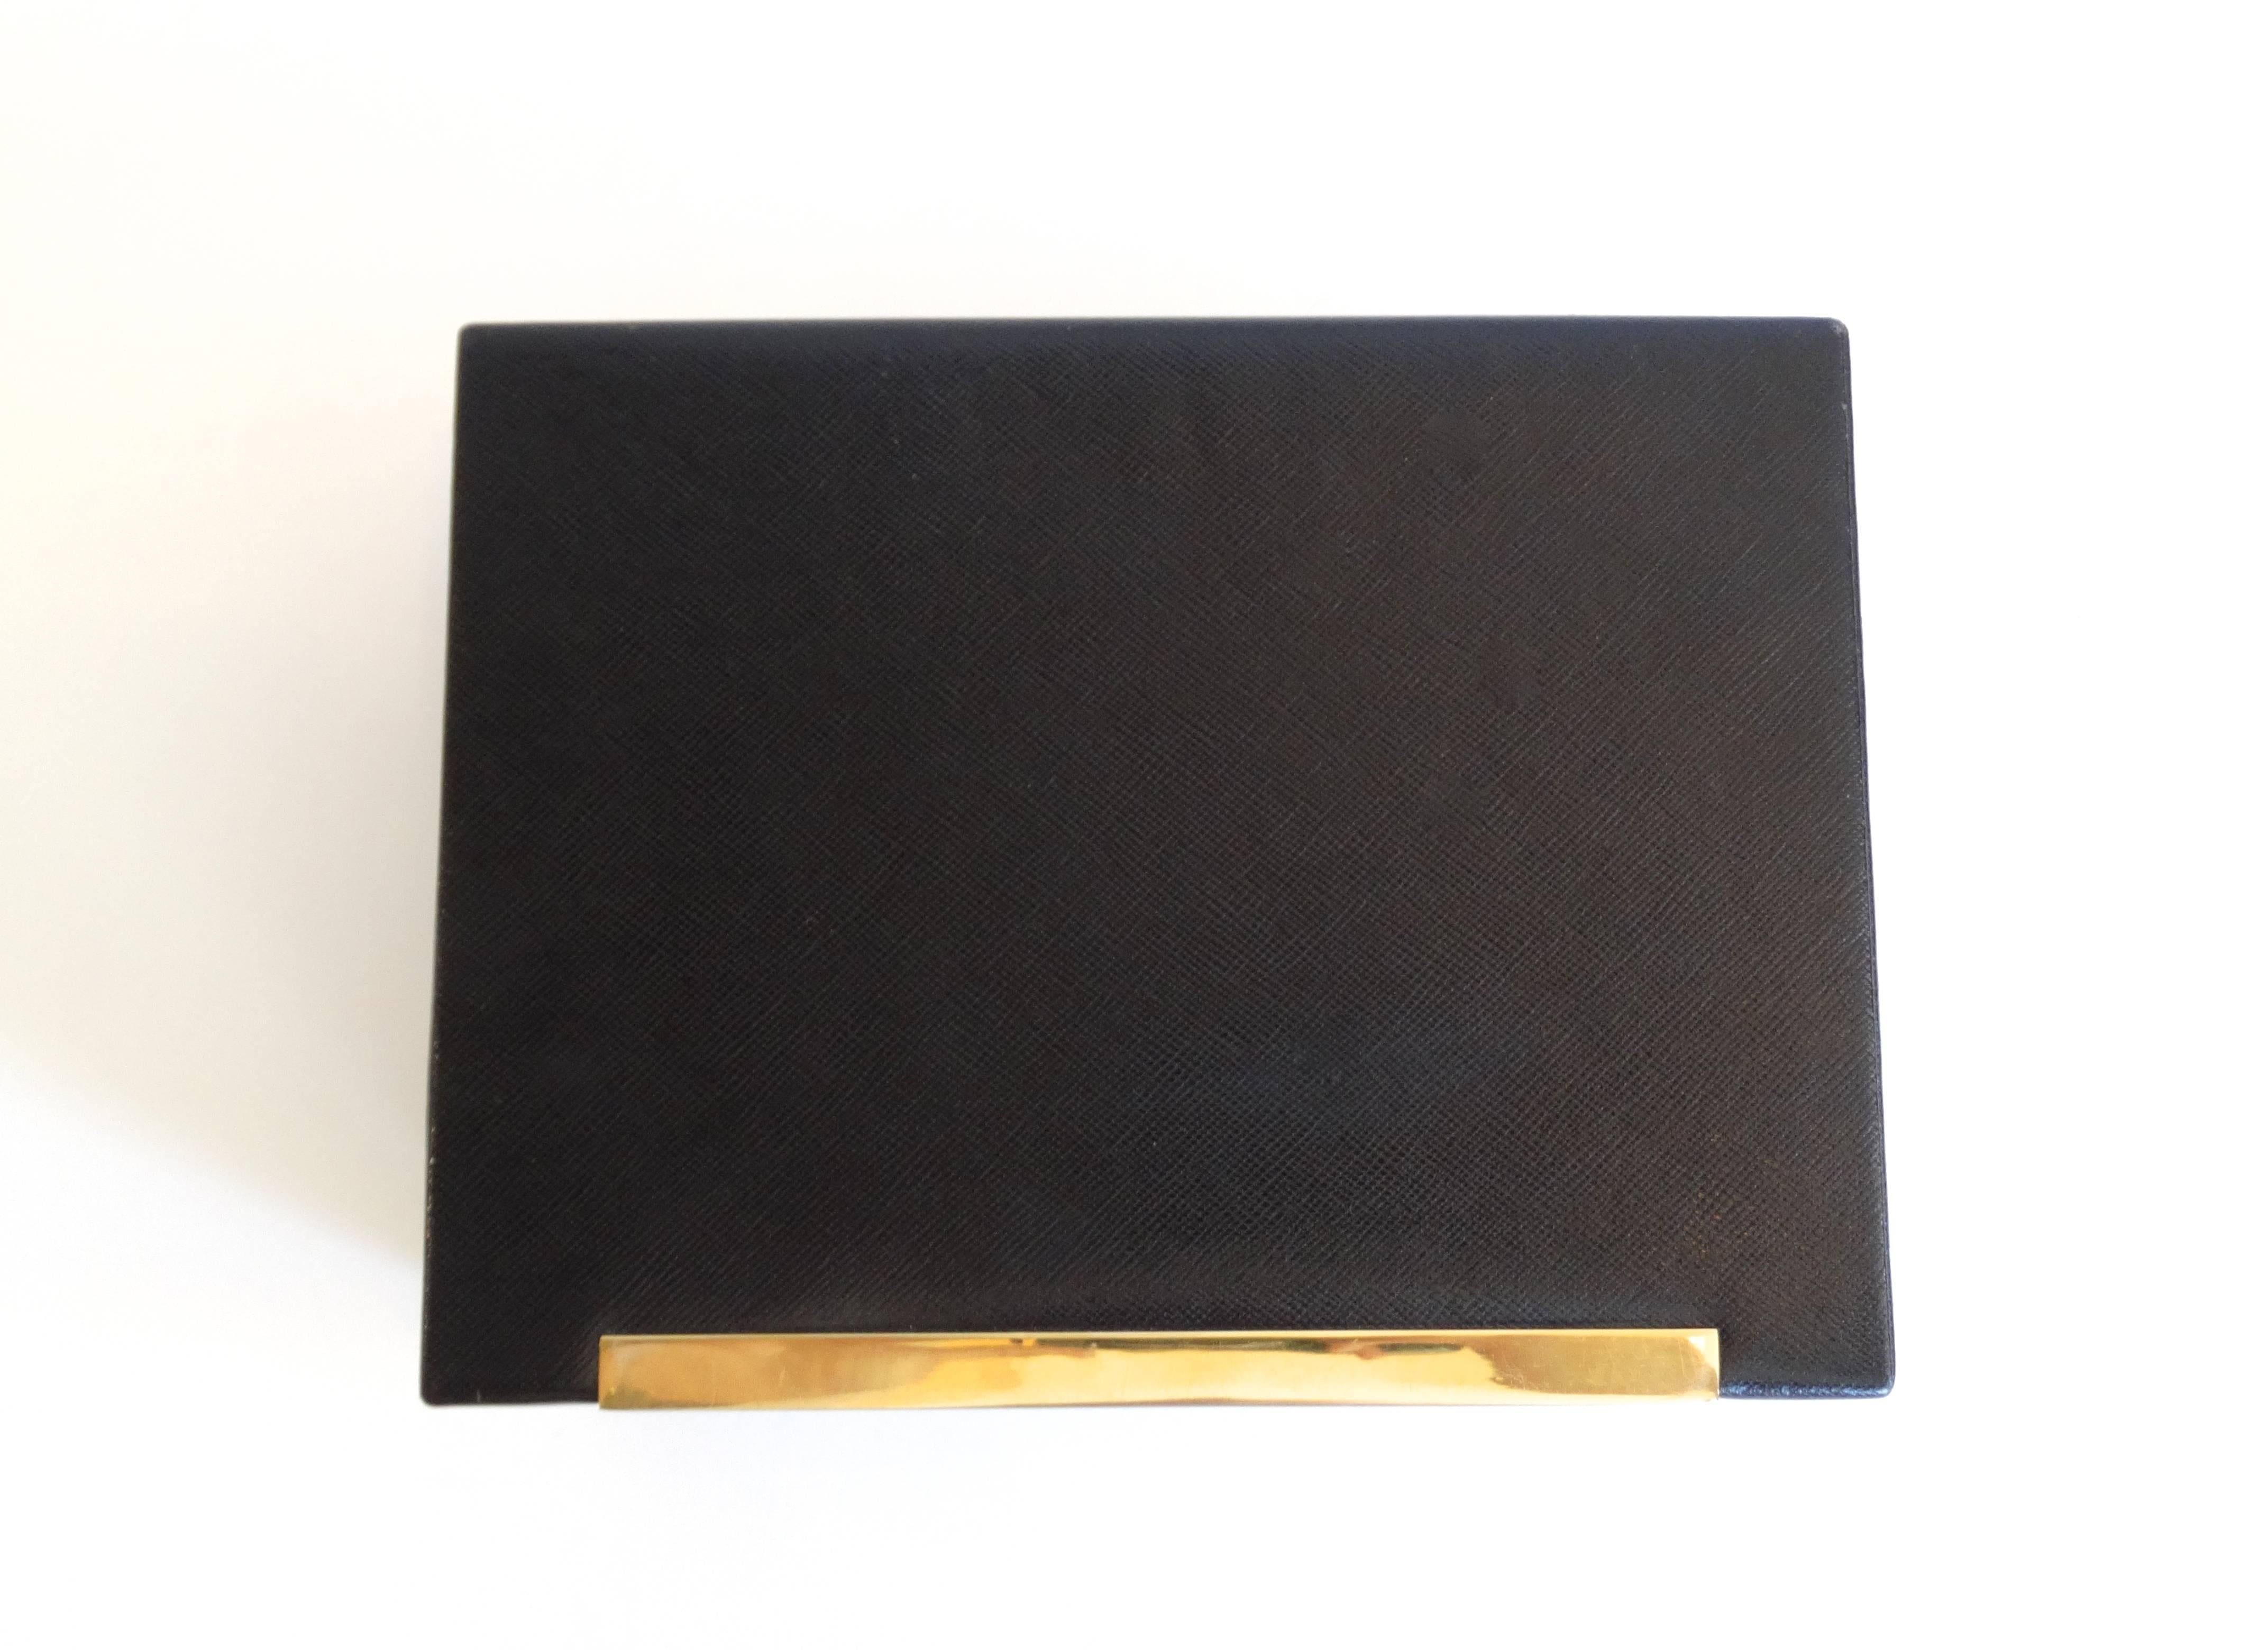 Fantastic 80's Black leather Gucci jewelry box! Comes with Gucci logo gold key. Removable tray in the bottom, features ring displays at either side. Tan suede interior. Some light wear- visible in the detail shots. made in Italy by GUCCI' embossed